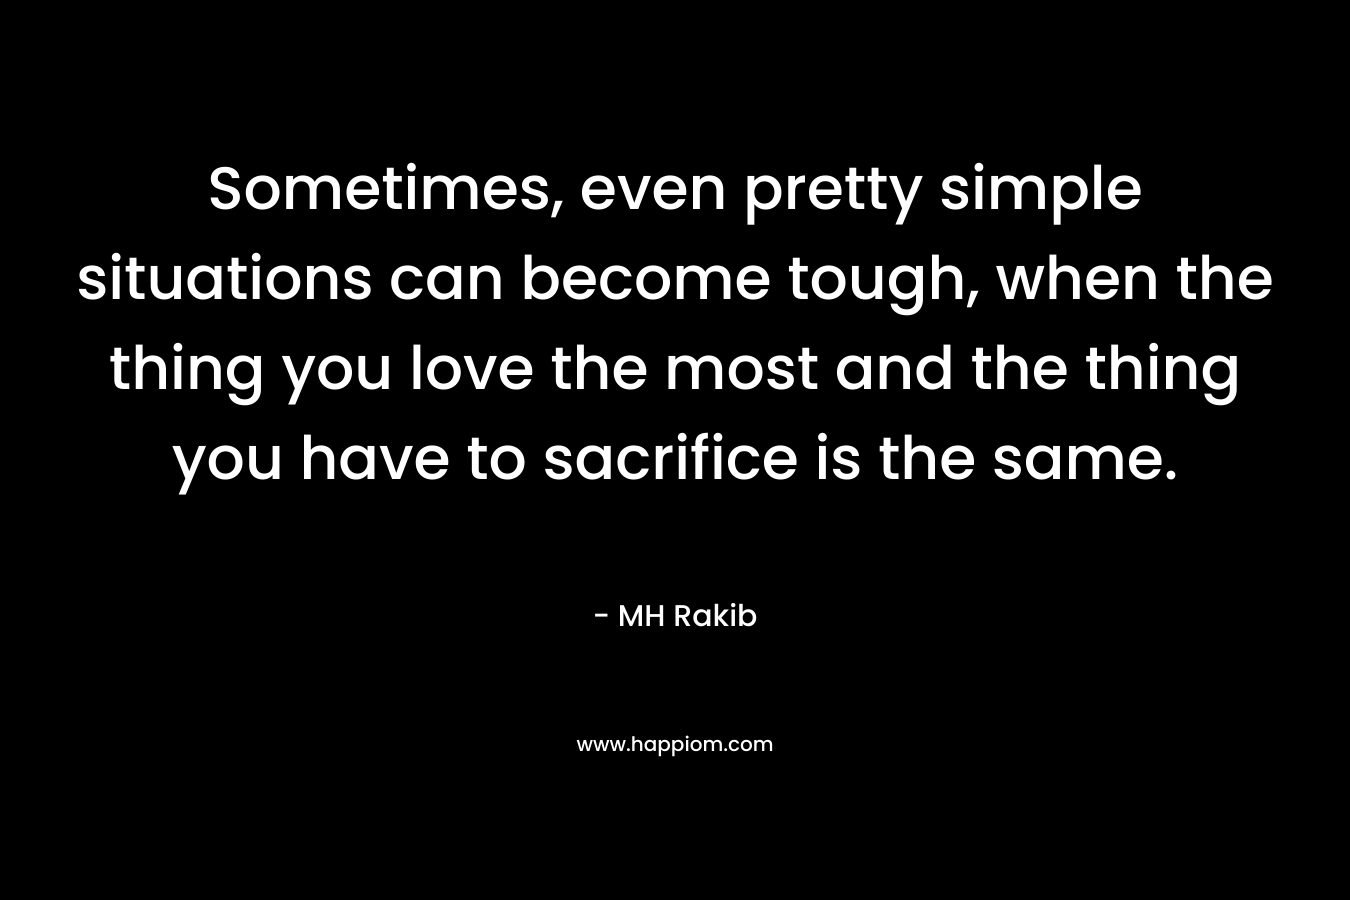 Sometimes, even pretty simple situations can become tough, when the thing you love the most and the thing you have to sacrifice is the same. – MH Rakib